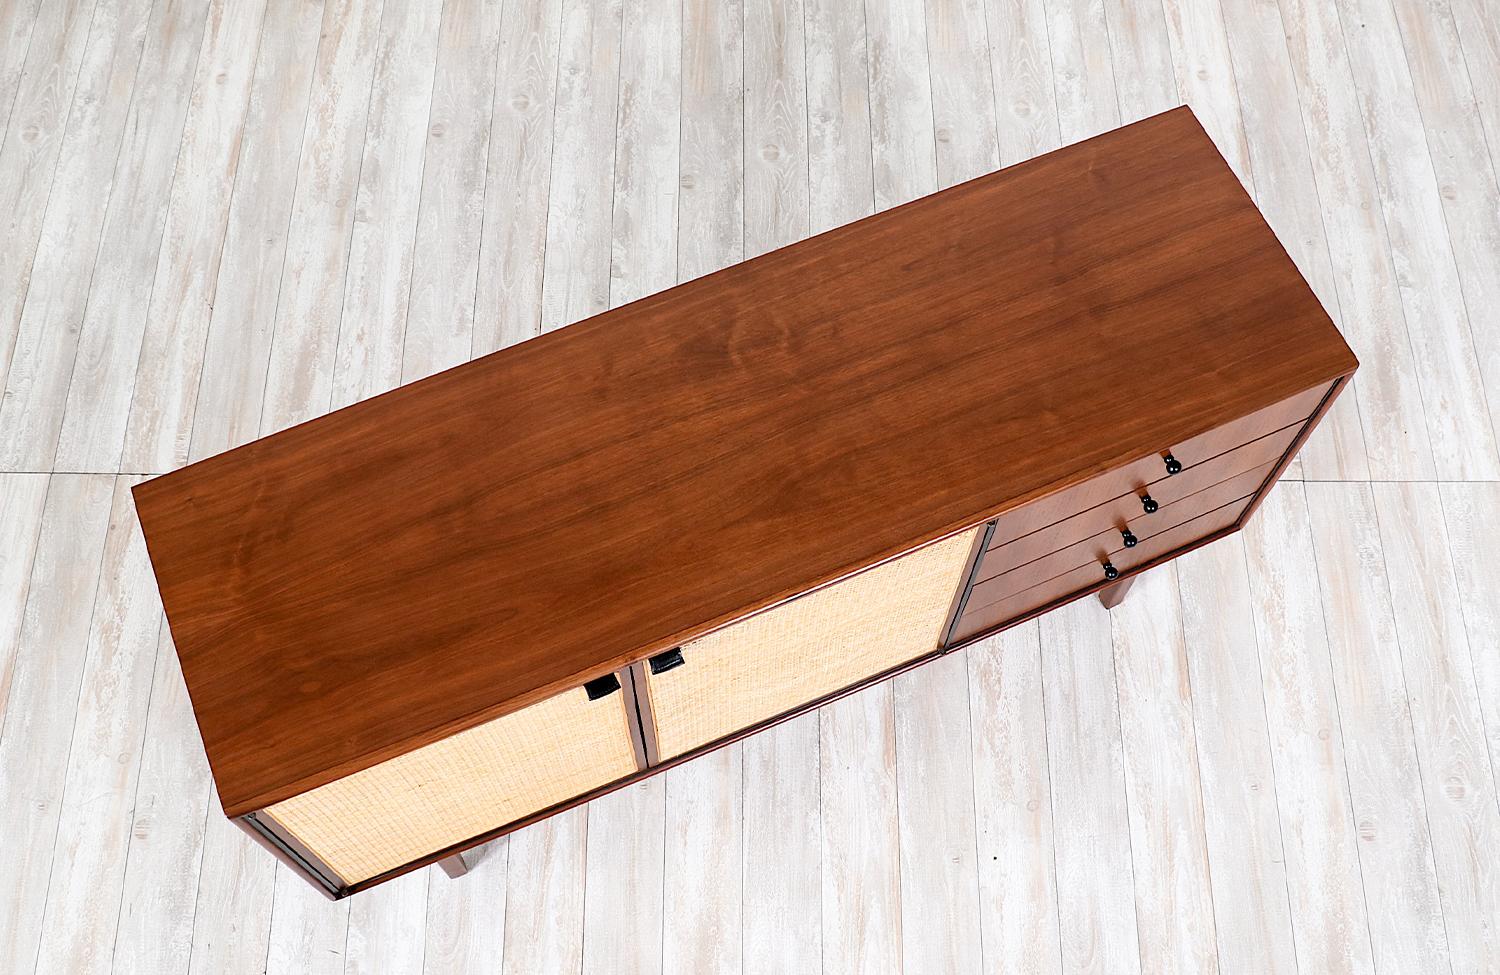 Leather Mid-Century Modern Walnut & Cane Credenza by Jack Cartwright for Founders